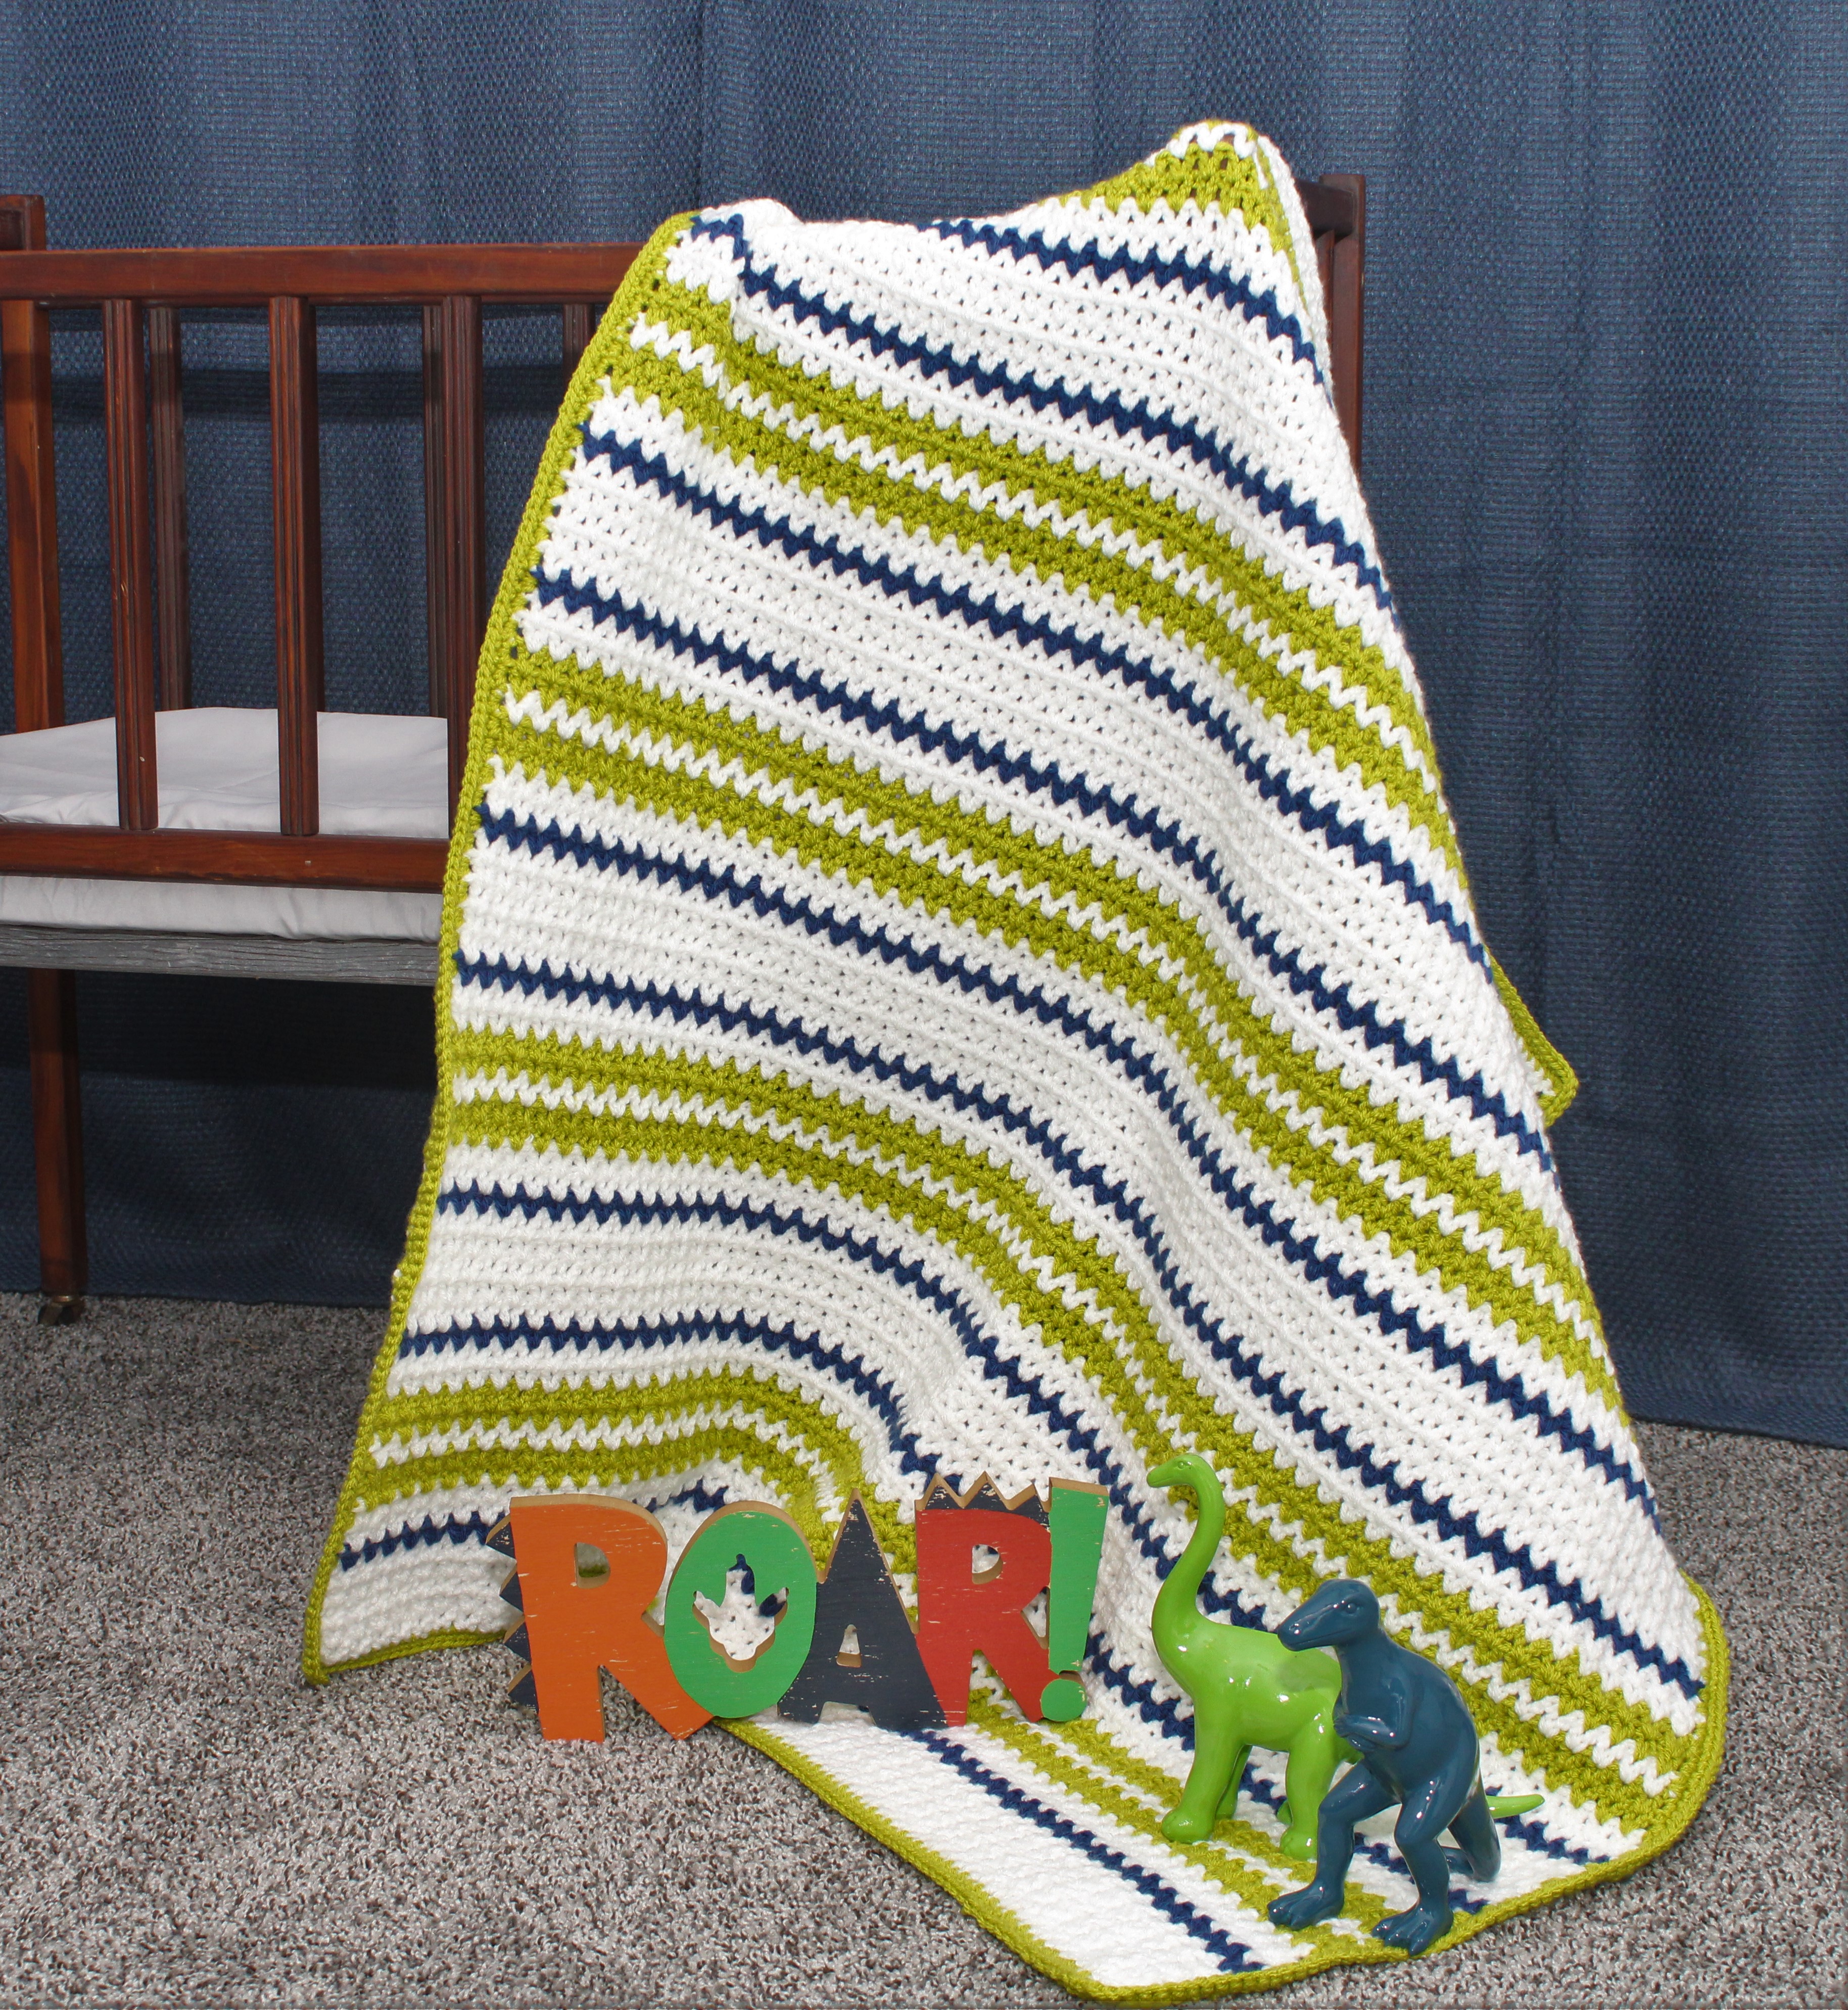 white green and blue baby afghan draped over a crib with blue and green dinosaurs on the edge with the word roar!